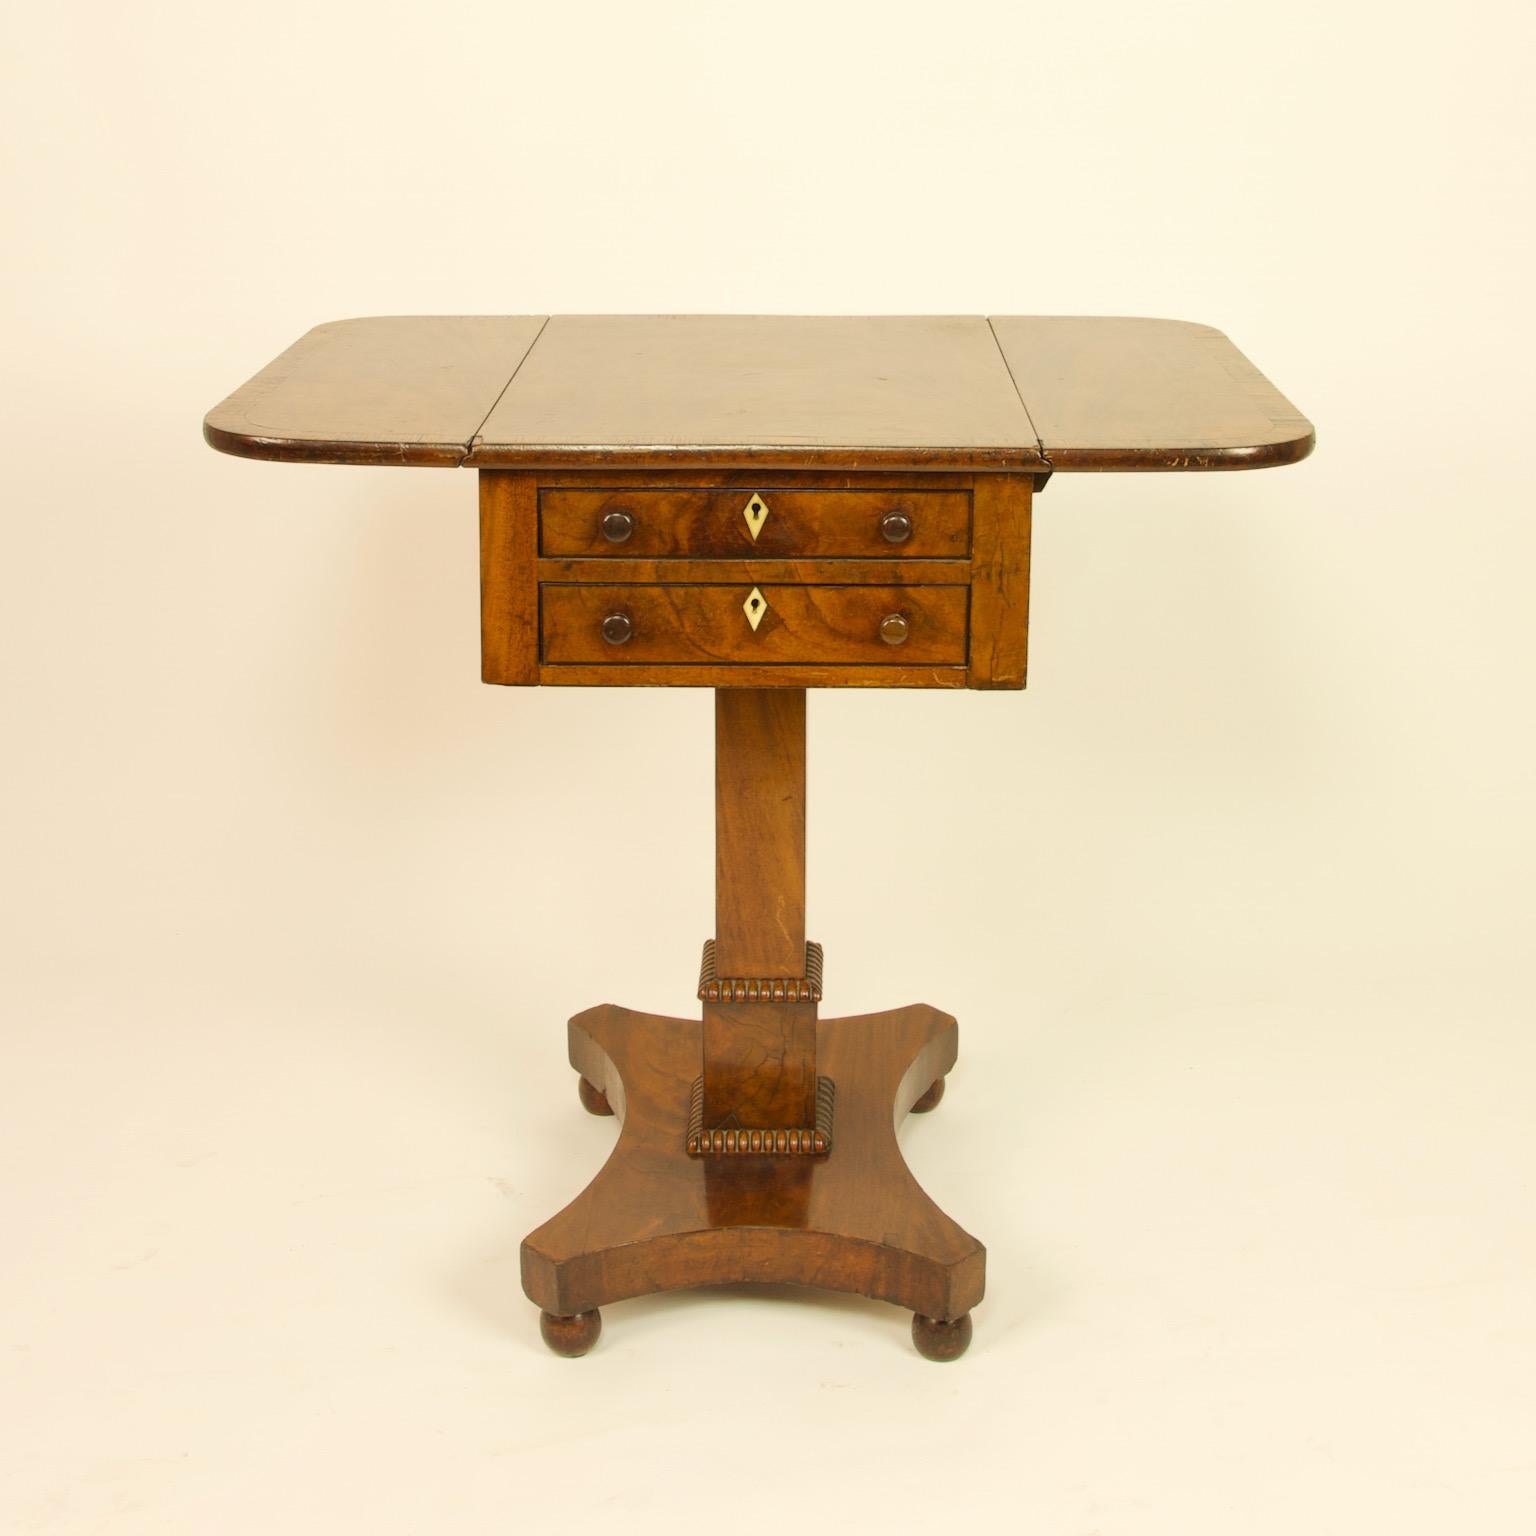 19th Century English Regency Mahogany Small Pembroke or Drop-Leaf Side Table For Sale 2